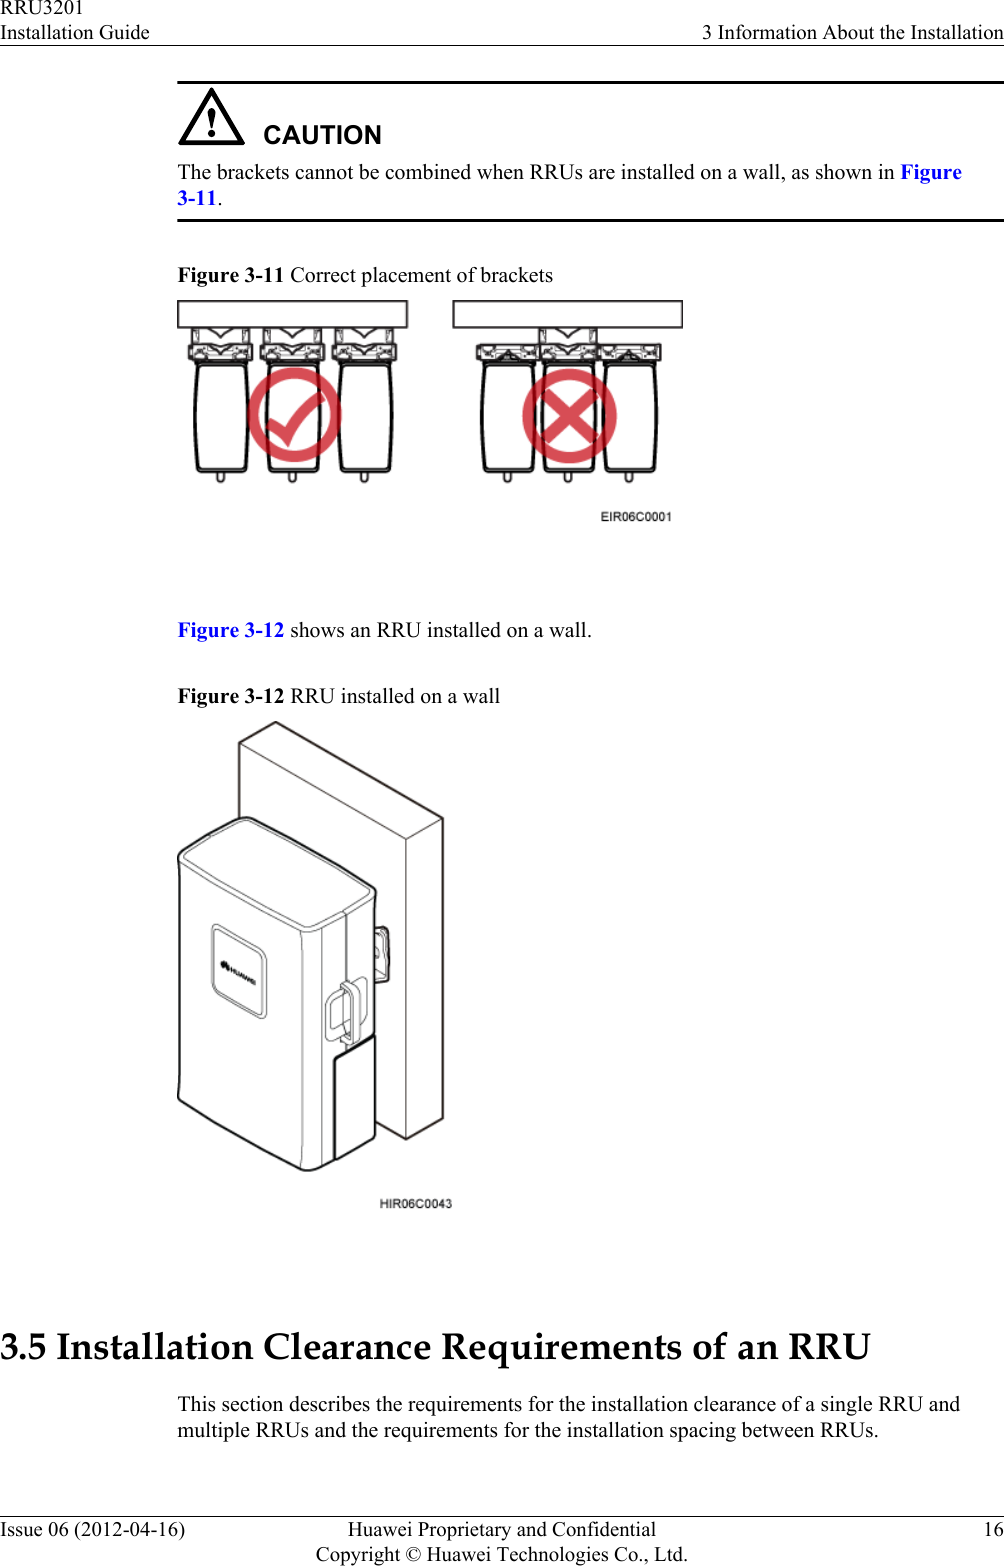 CAUTIONThe brackets cannot be combined when RRUs are installed on a wall, as shown in Figure3-11.Figure 3-11 Correct placement of brackets Figure 3-12 shows an RRU installed on a wall.Figure 3-12 RRU installed on a wall 3.5 Installation Clearance Requirements of an RRUThis section describes the requirements for the installation clearance of a single RRU andmultiple RRUs and the requirements for the installation spacing between RRUs.RRU3201Installation Guide 3 Information About the InstallationIssue 06 (2012-04-16) Huawei Proprietary and ConfidentialCopyright © Huawei Technologies Co., Ltd.16